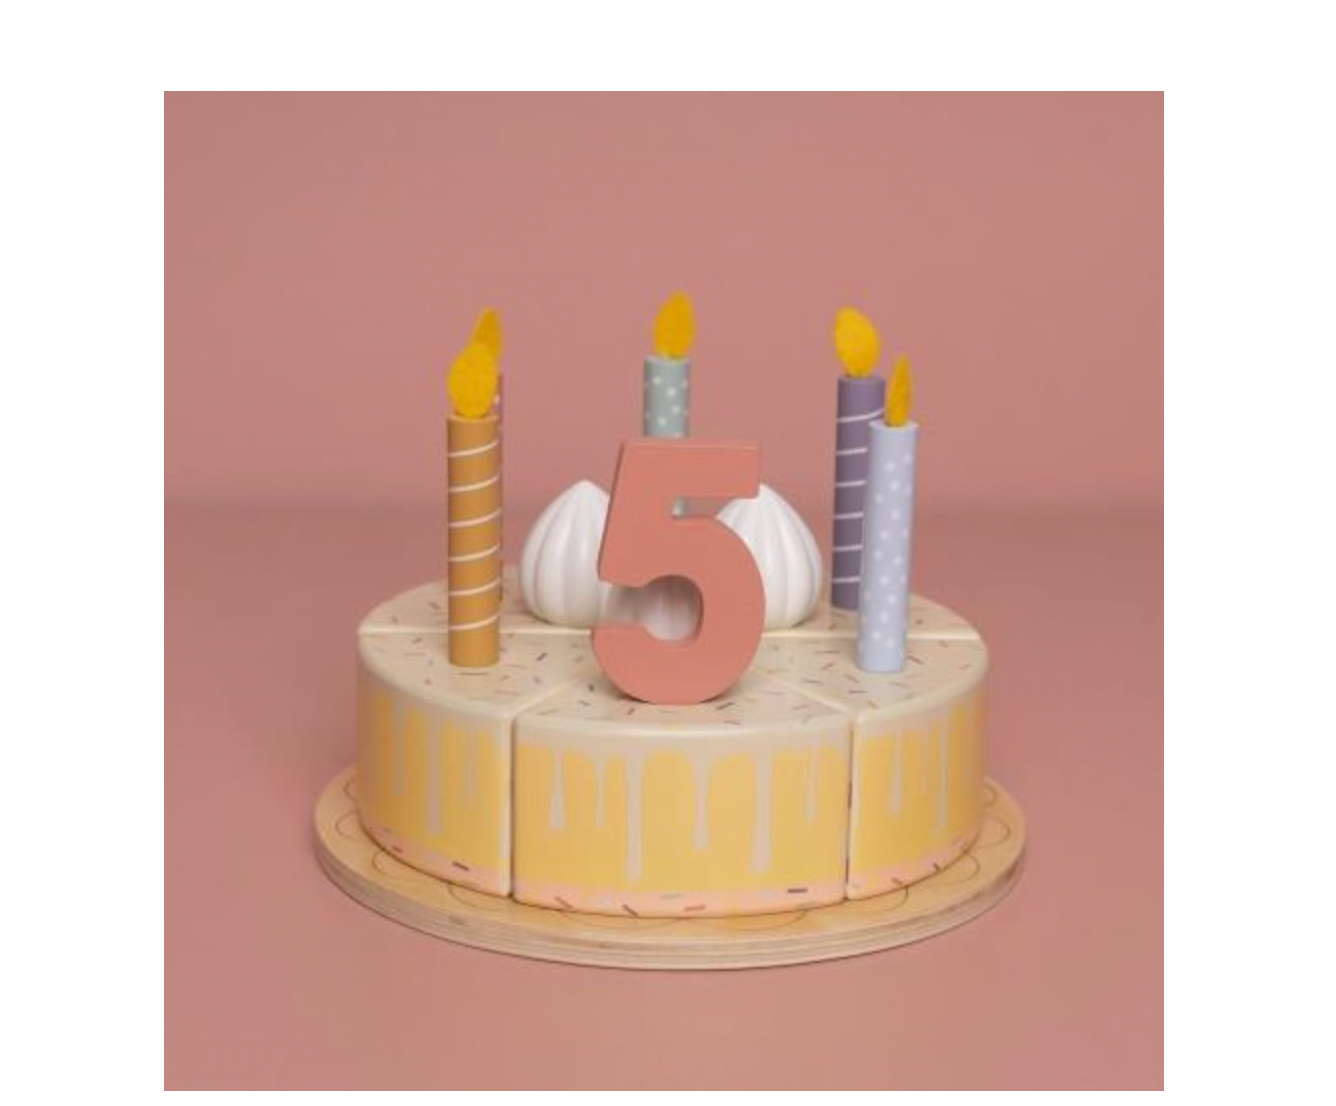 Wooden Birthday Cake with Age 1 to Age 5 Numbers